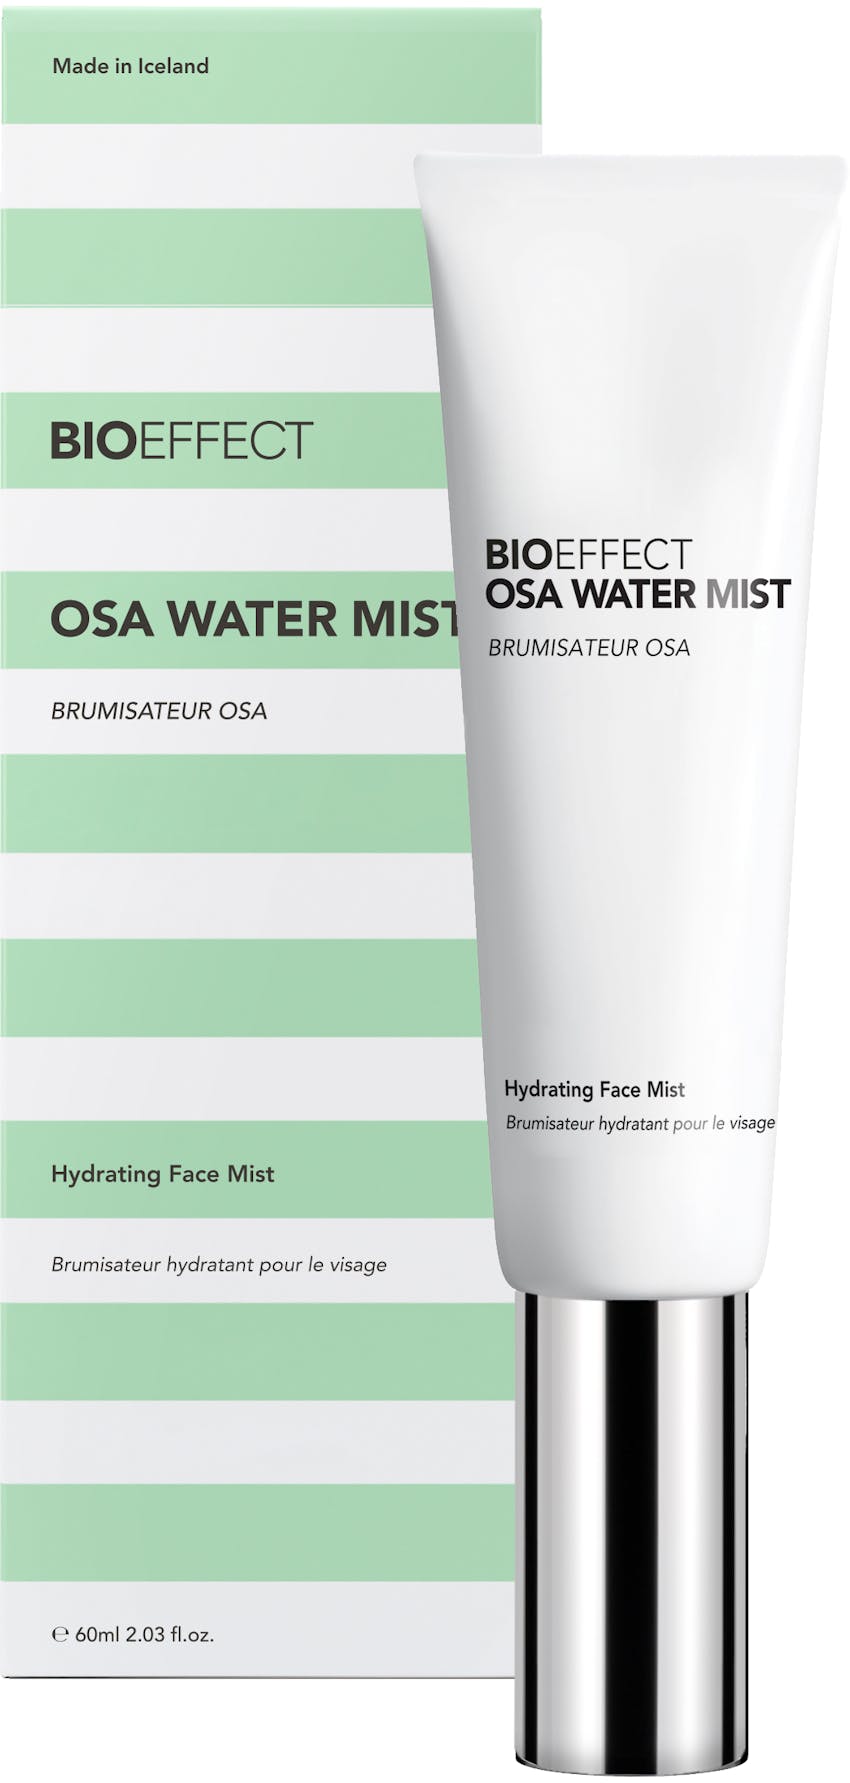 Green-and-white striped package with a small white bottle of BIOEFFECT Growth Factor Skincare OSA Water Mist to the right of the package.